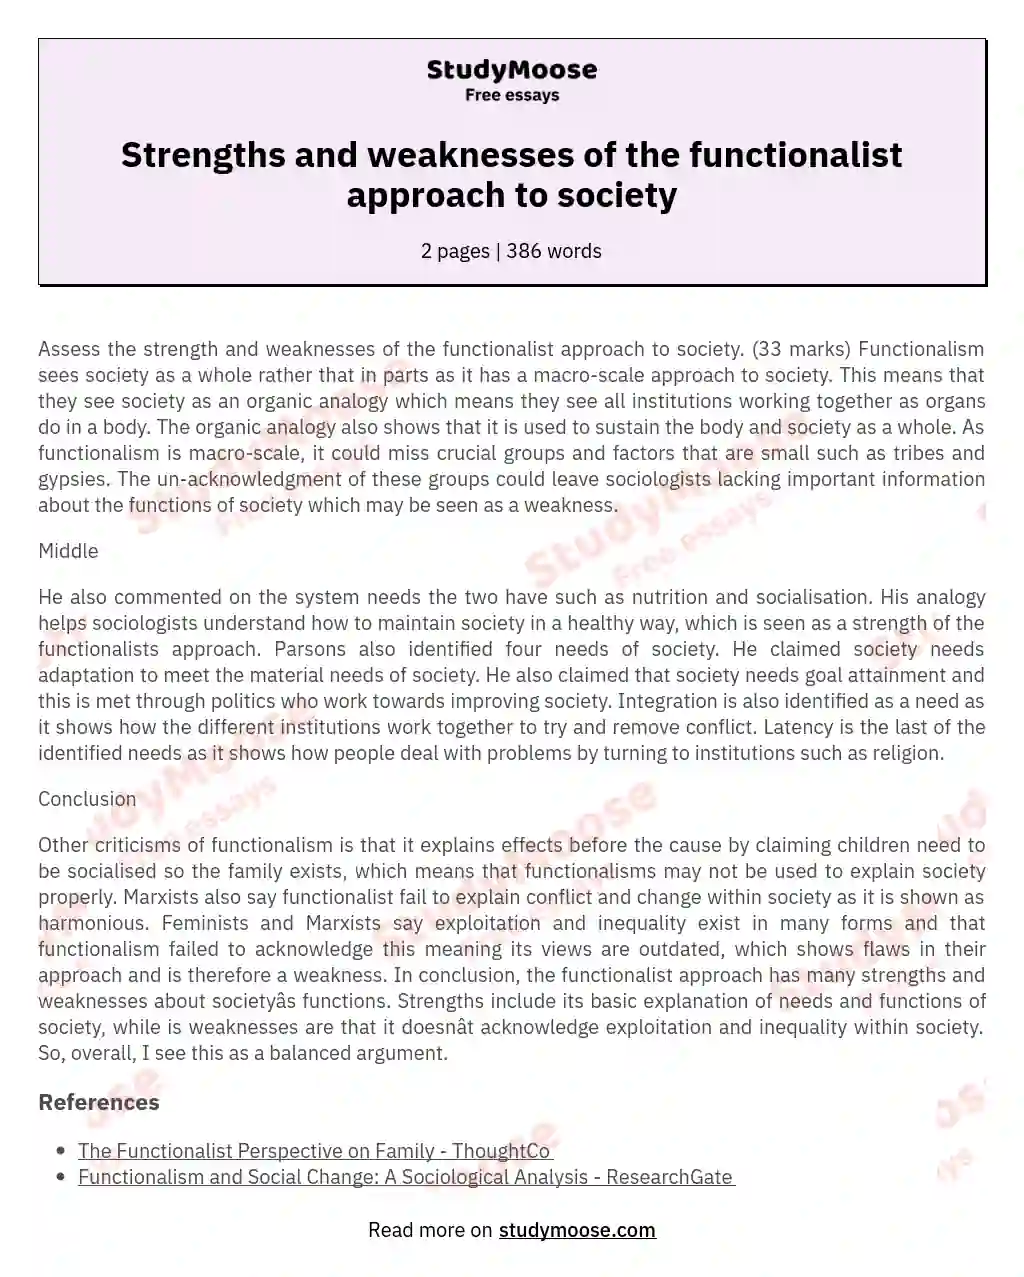 Strengths and weaknesses of the functionalist approach to society essay